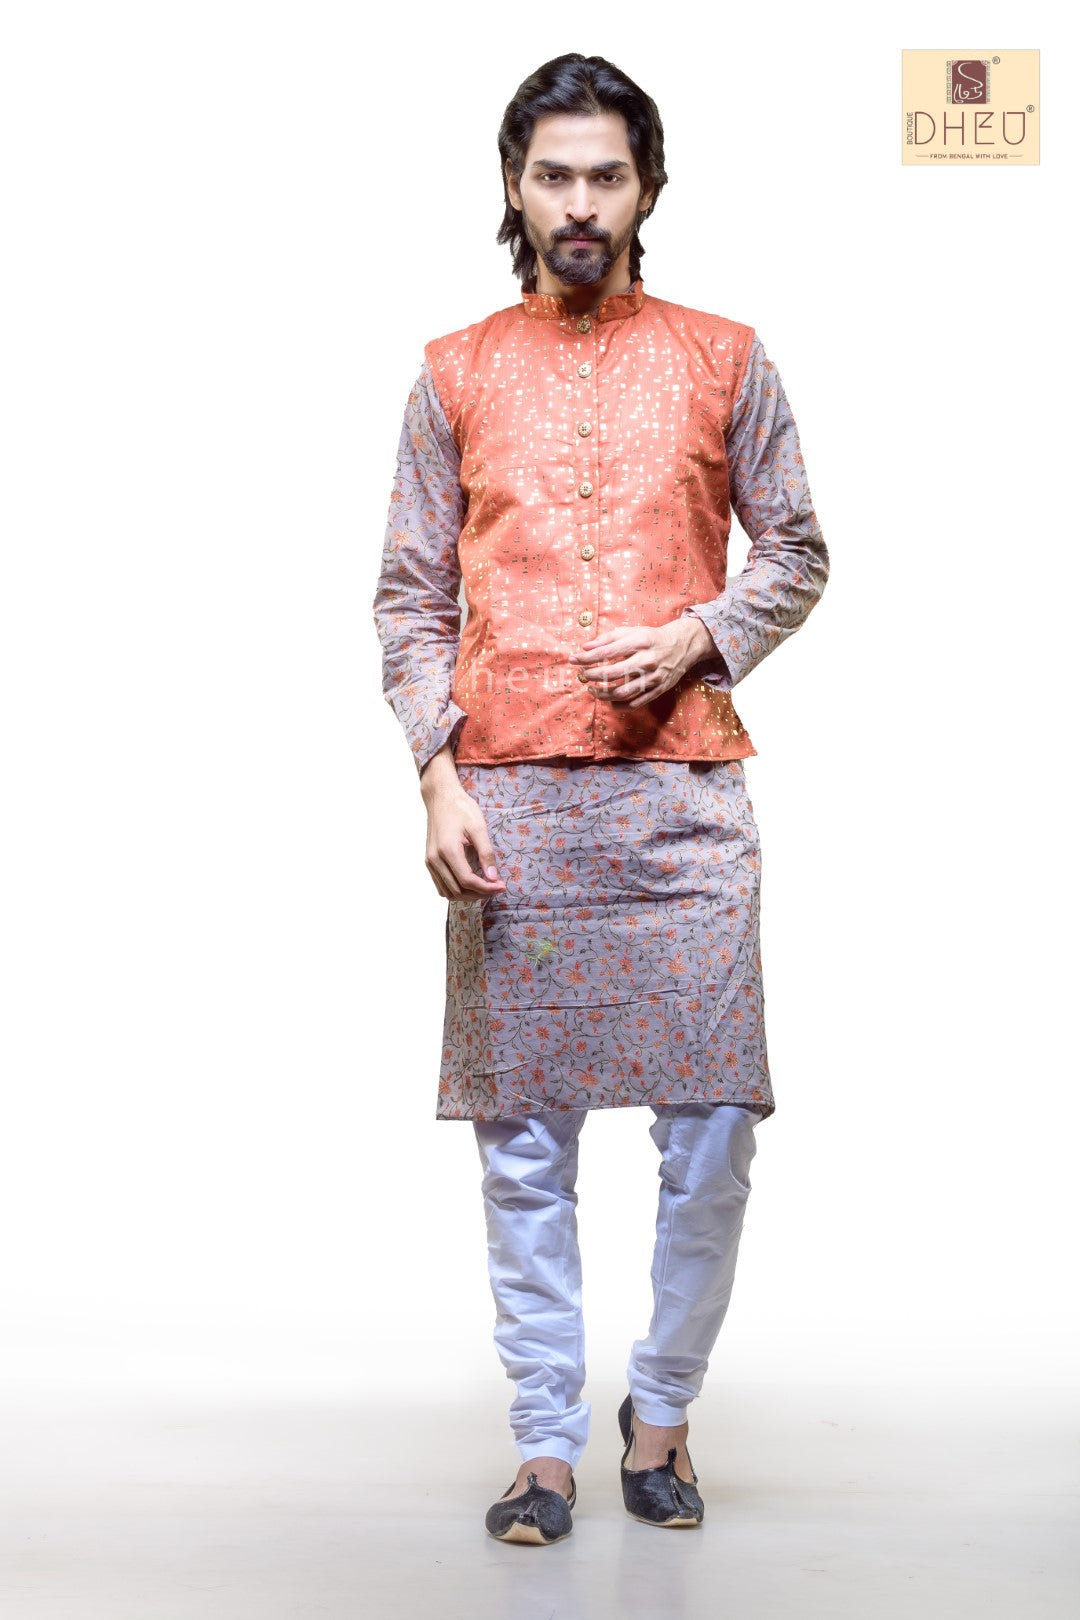 The designer , sophisticate orange jacket at low cost only in dheu.in